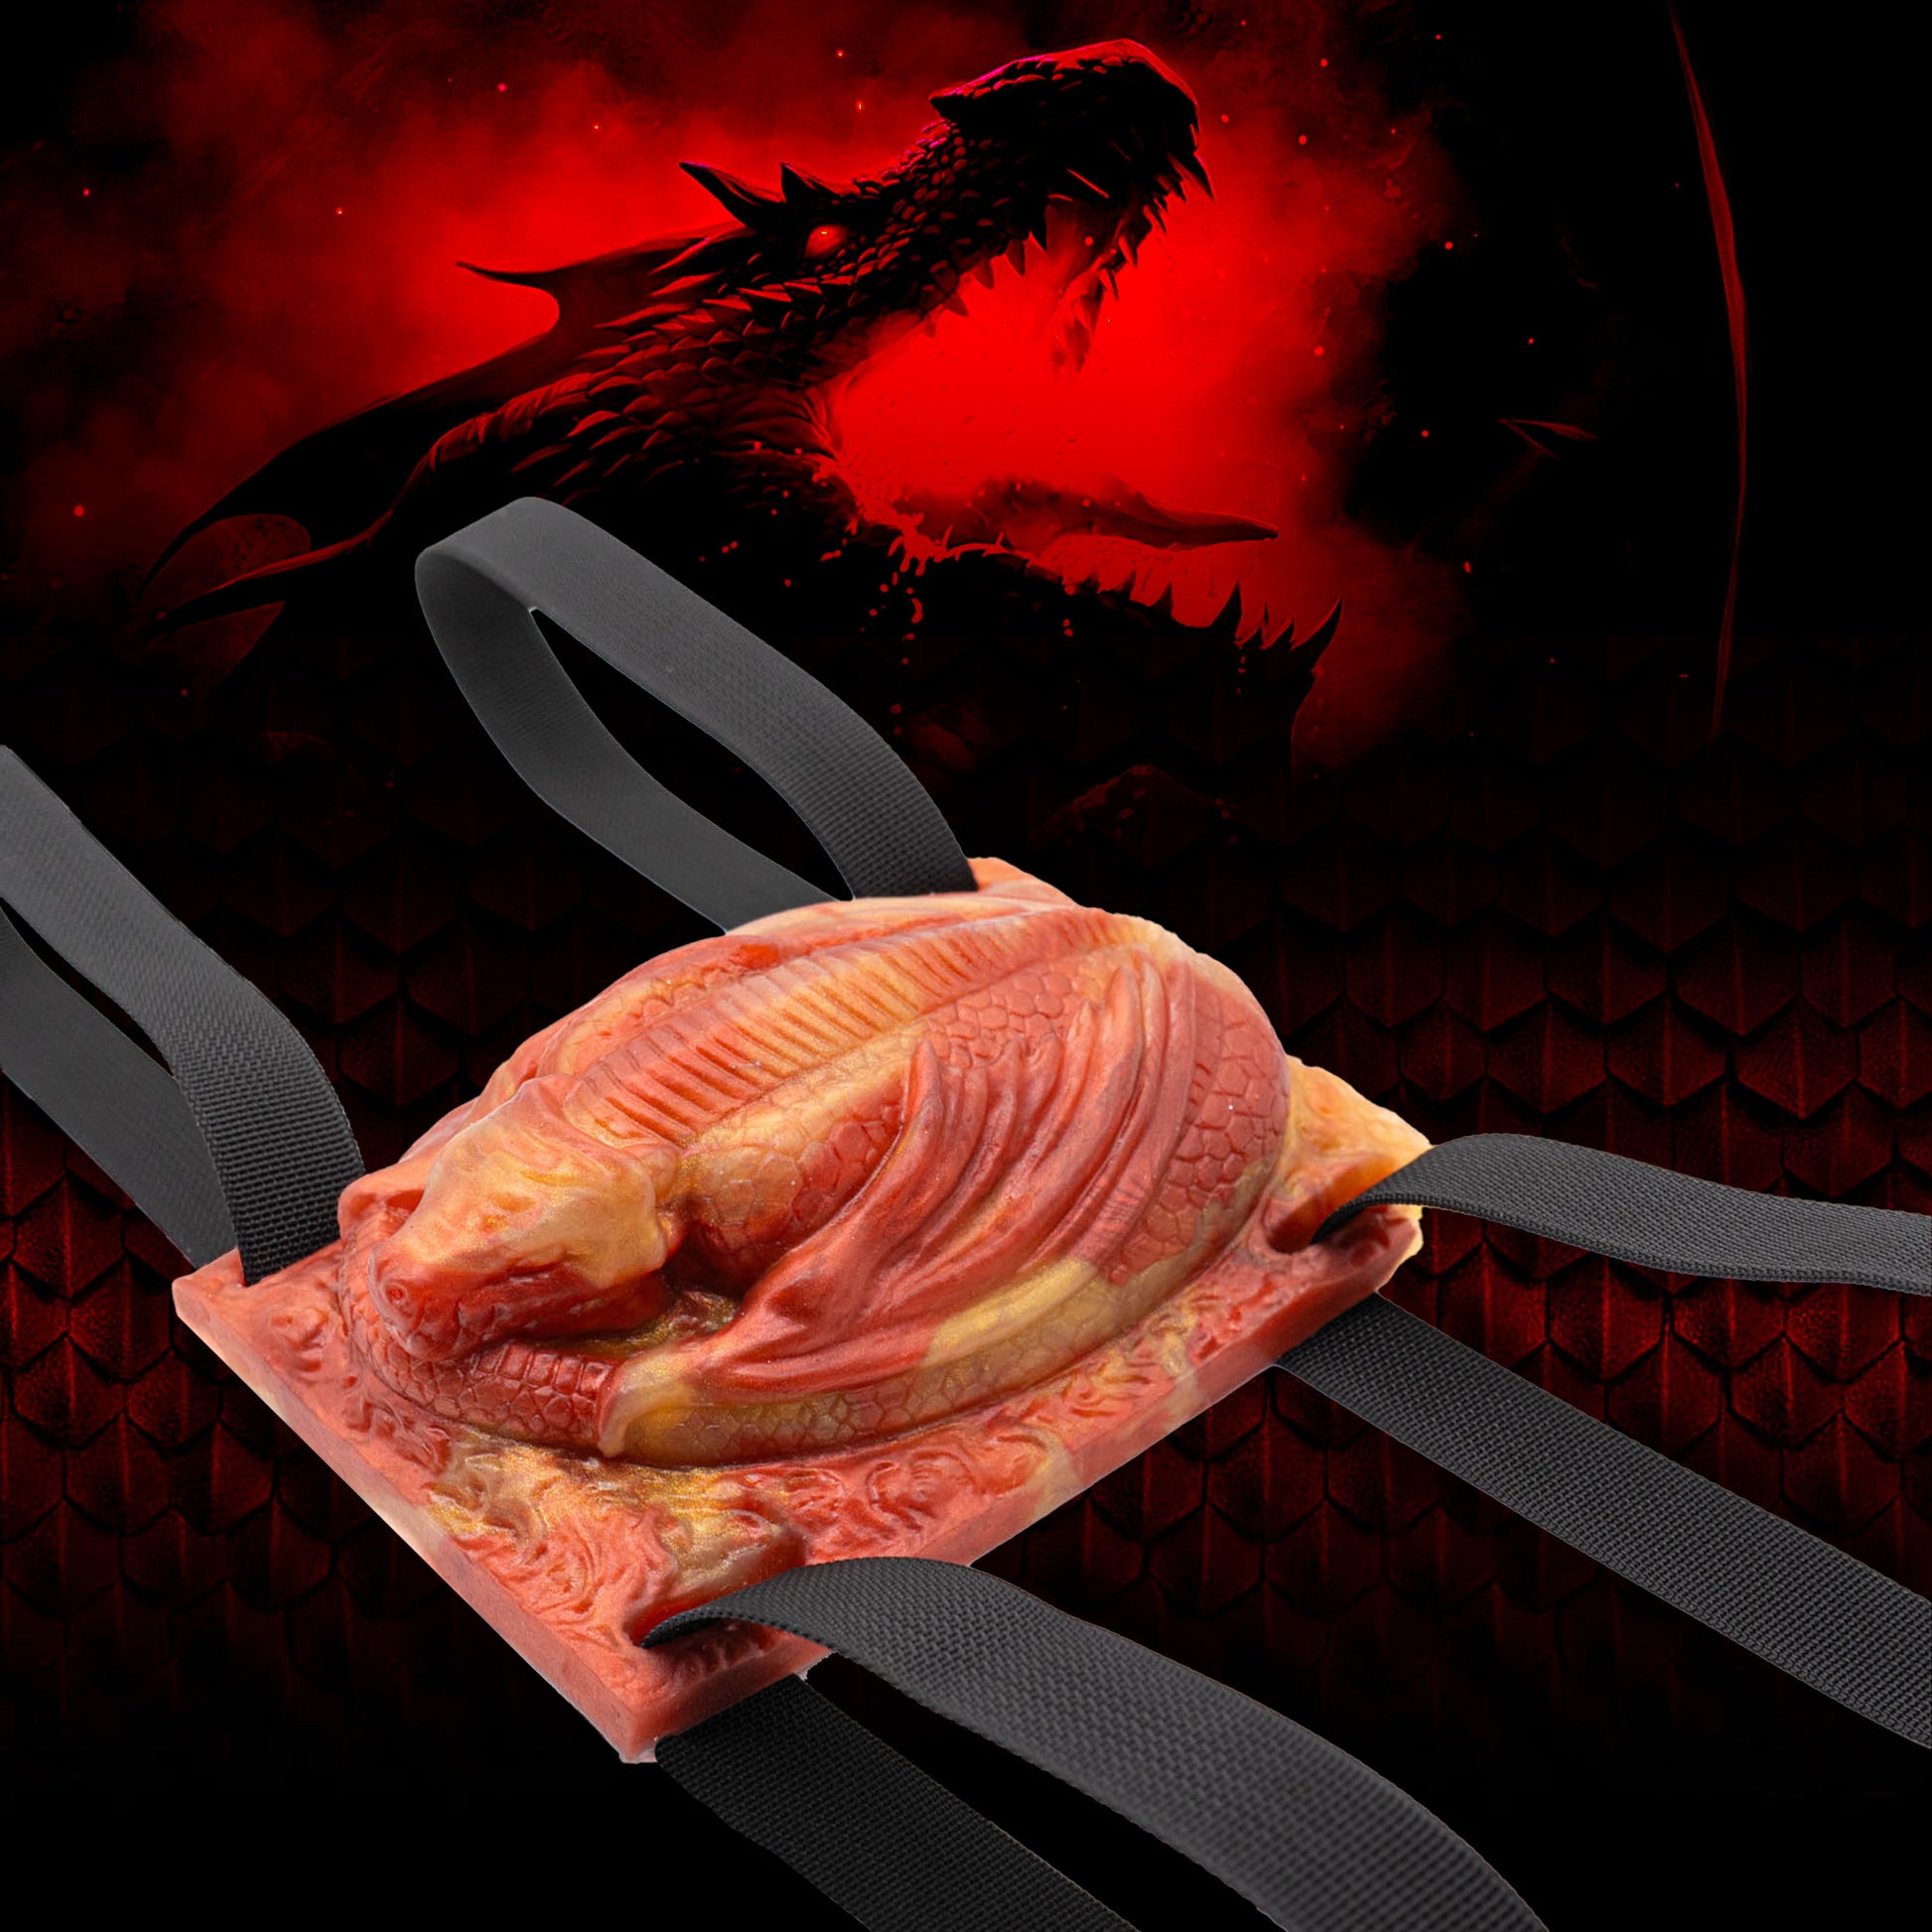 Our dragon-inspired grinder sex toy. Our grinder sex toys strap securely to any pillow, rolled-up blanket or towel, transforming into your very own sex saddle for your humping and grinding pleasures. 